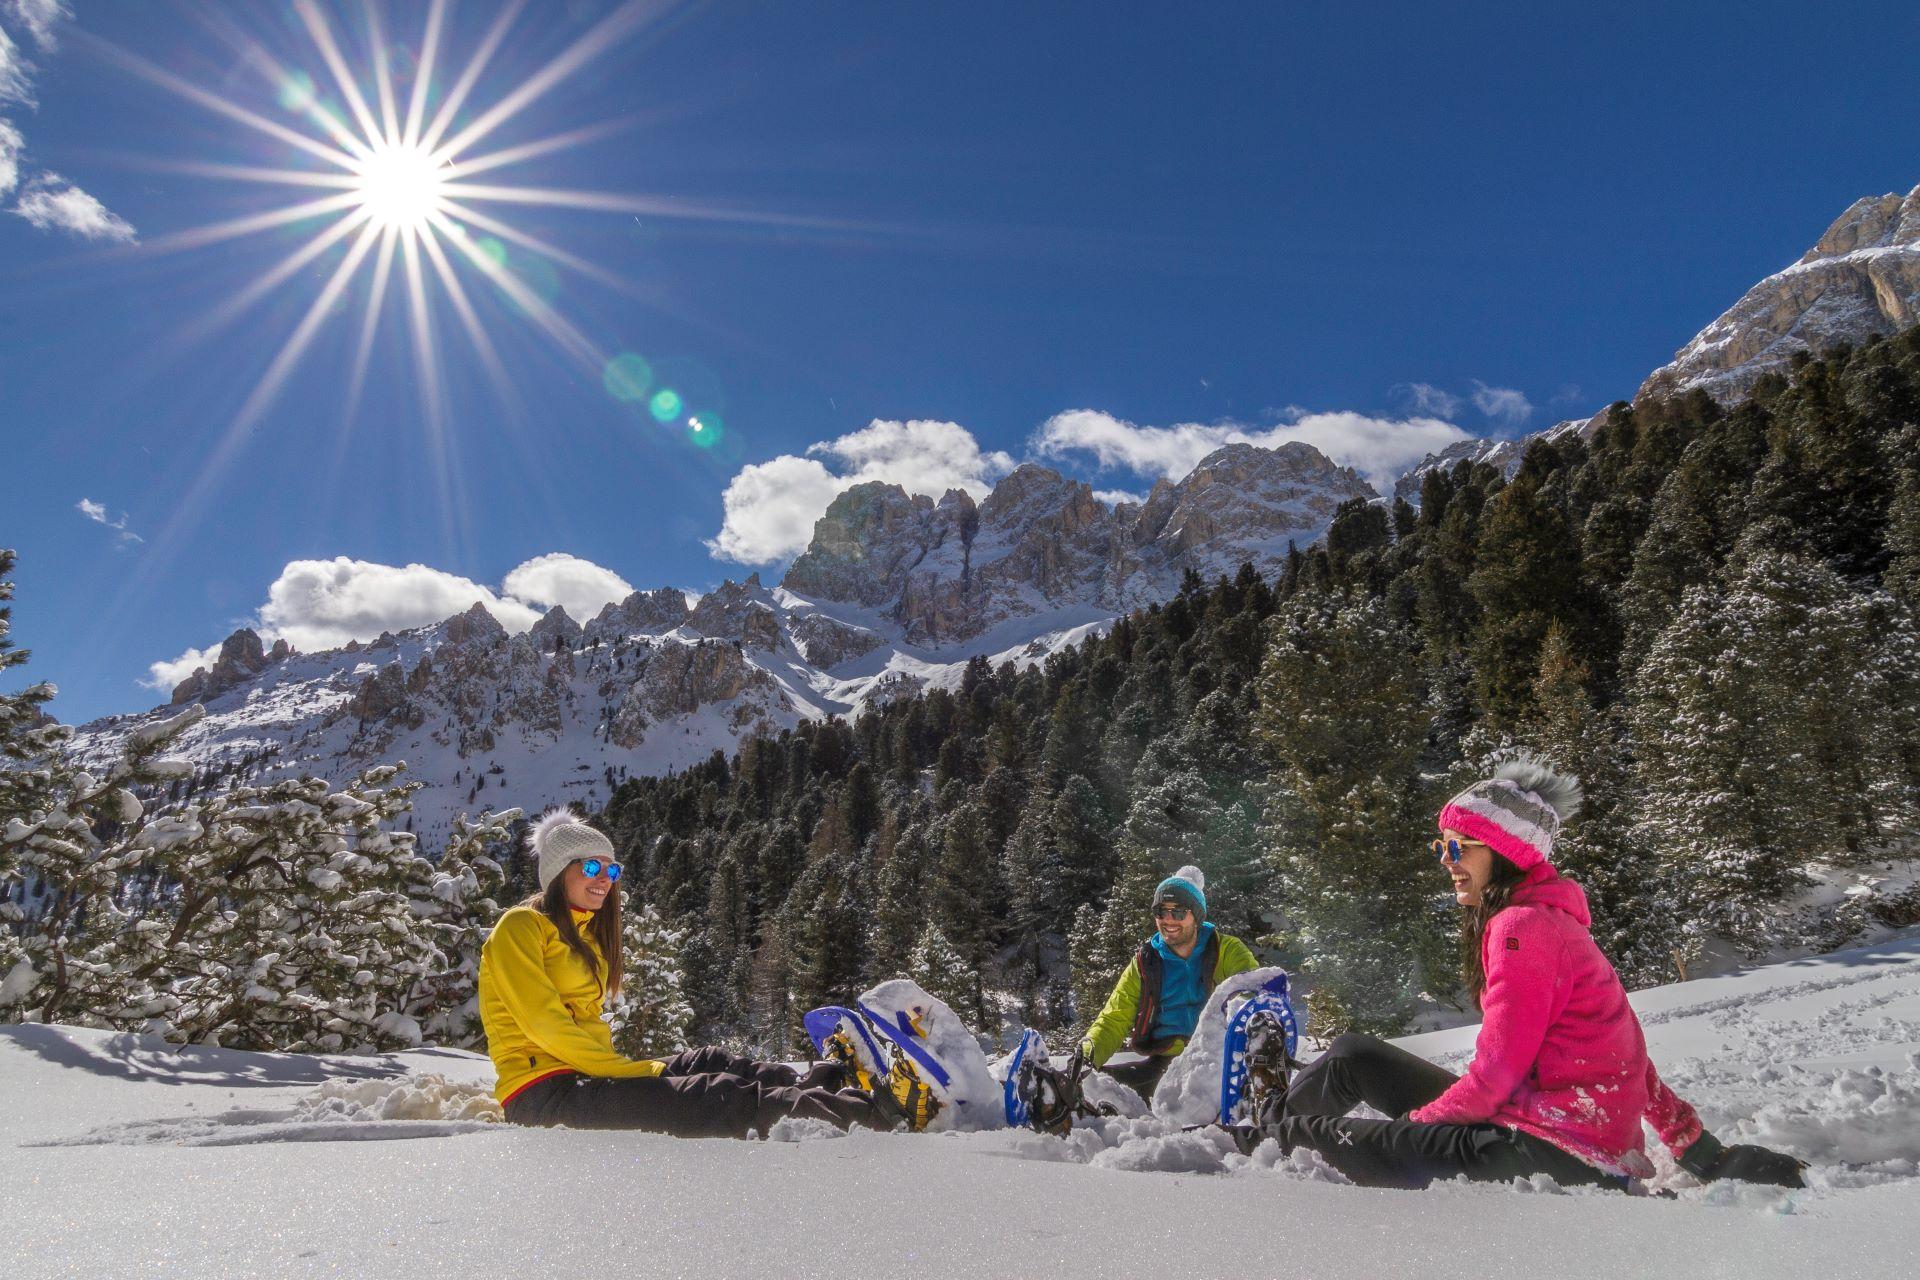 Activities for non-skiers in Val di Fassa